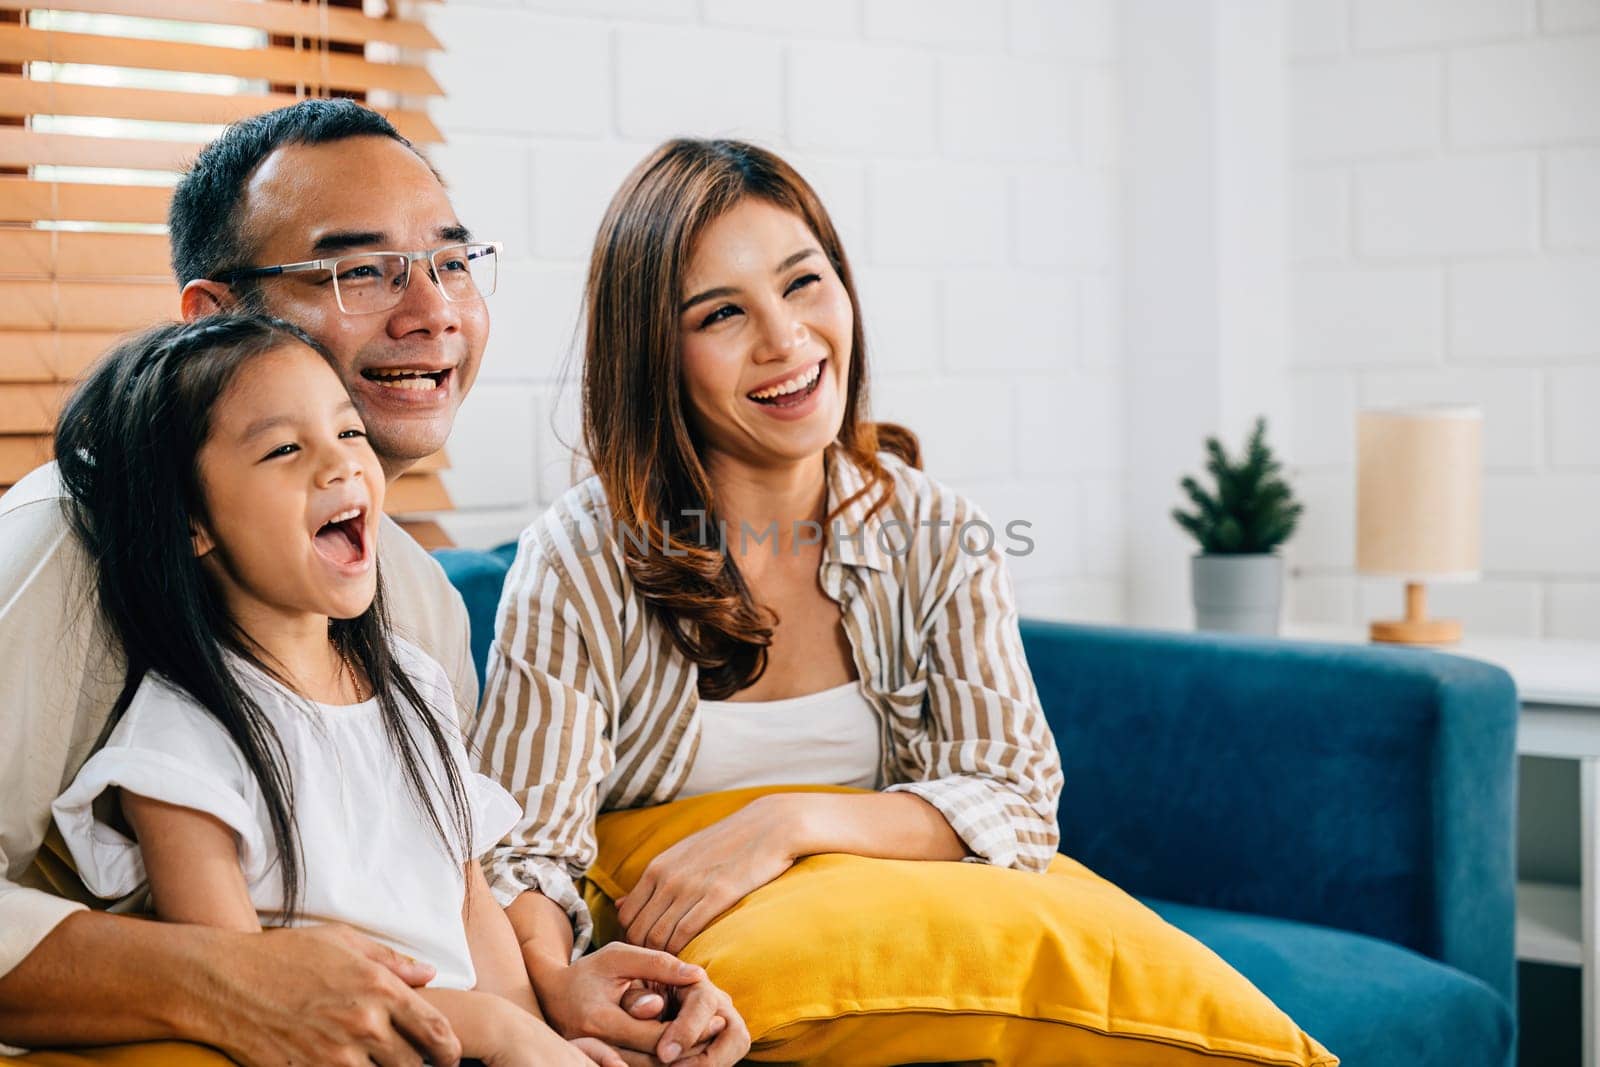 In their modern grooved house happy Asian family enjoys quality family time watching TV together on sofa. father mother son and daughter share laughter joy and togetherness during their weekend.